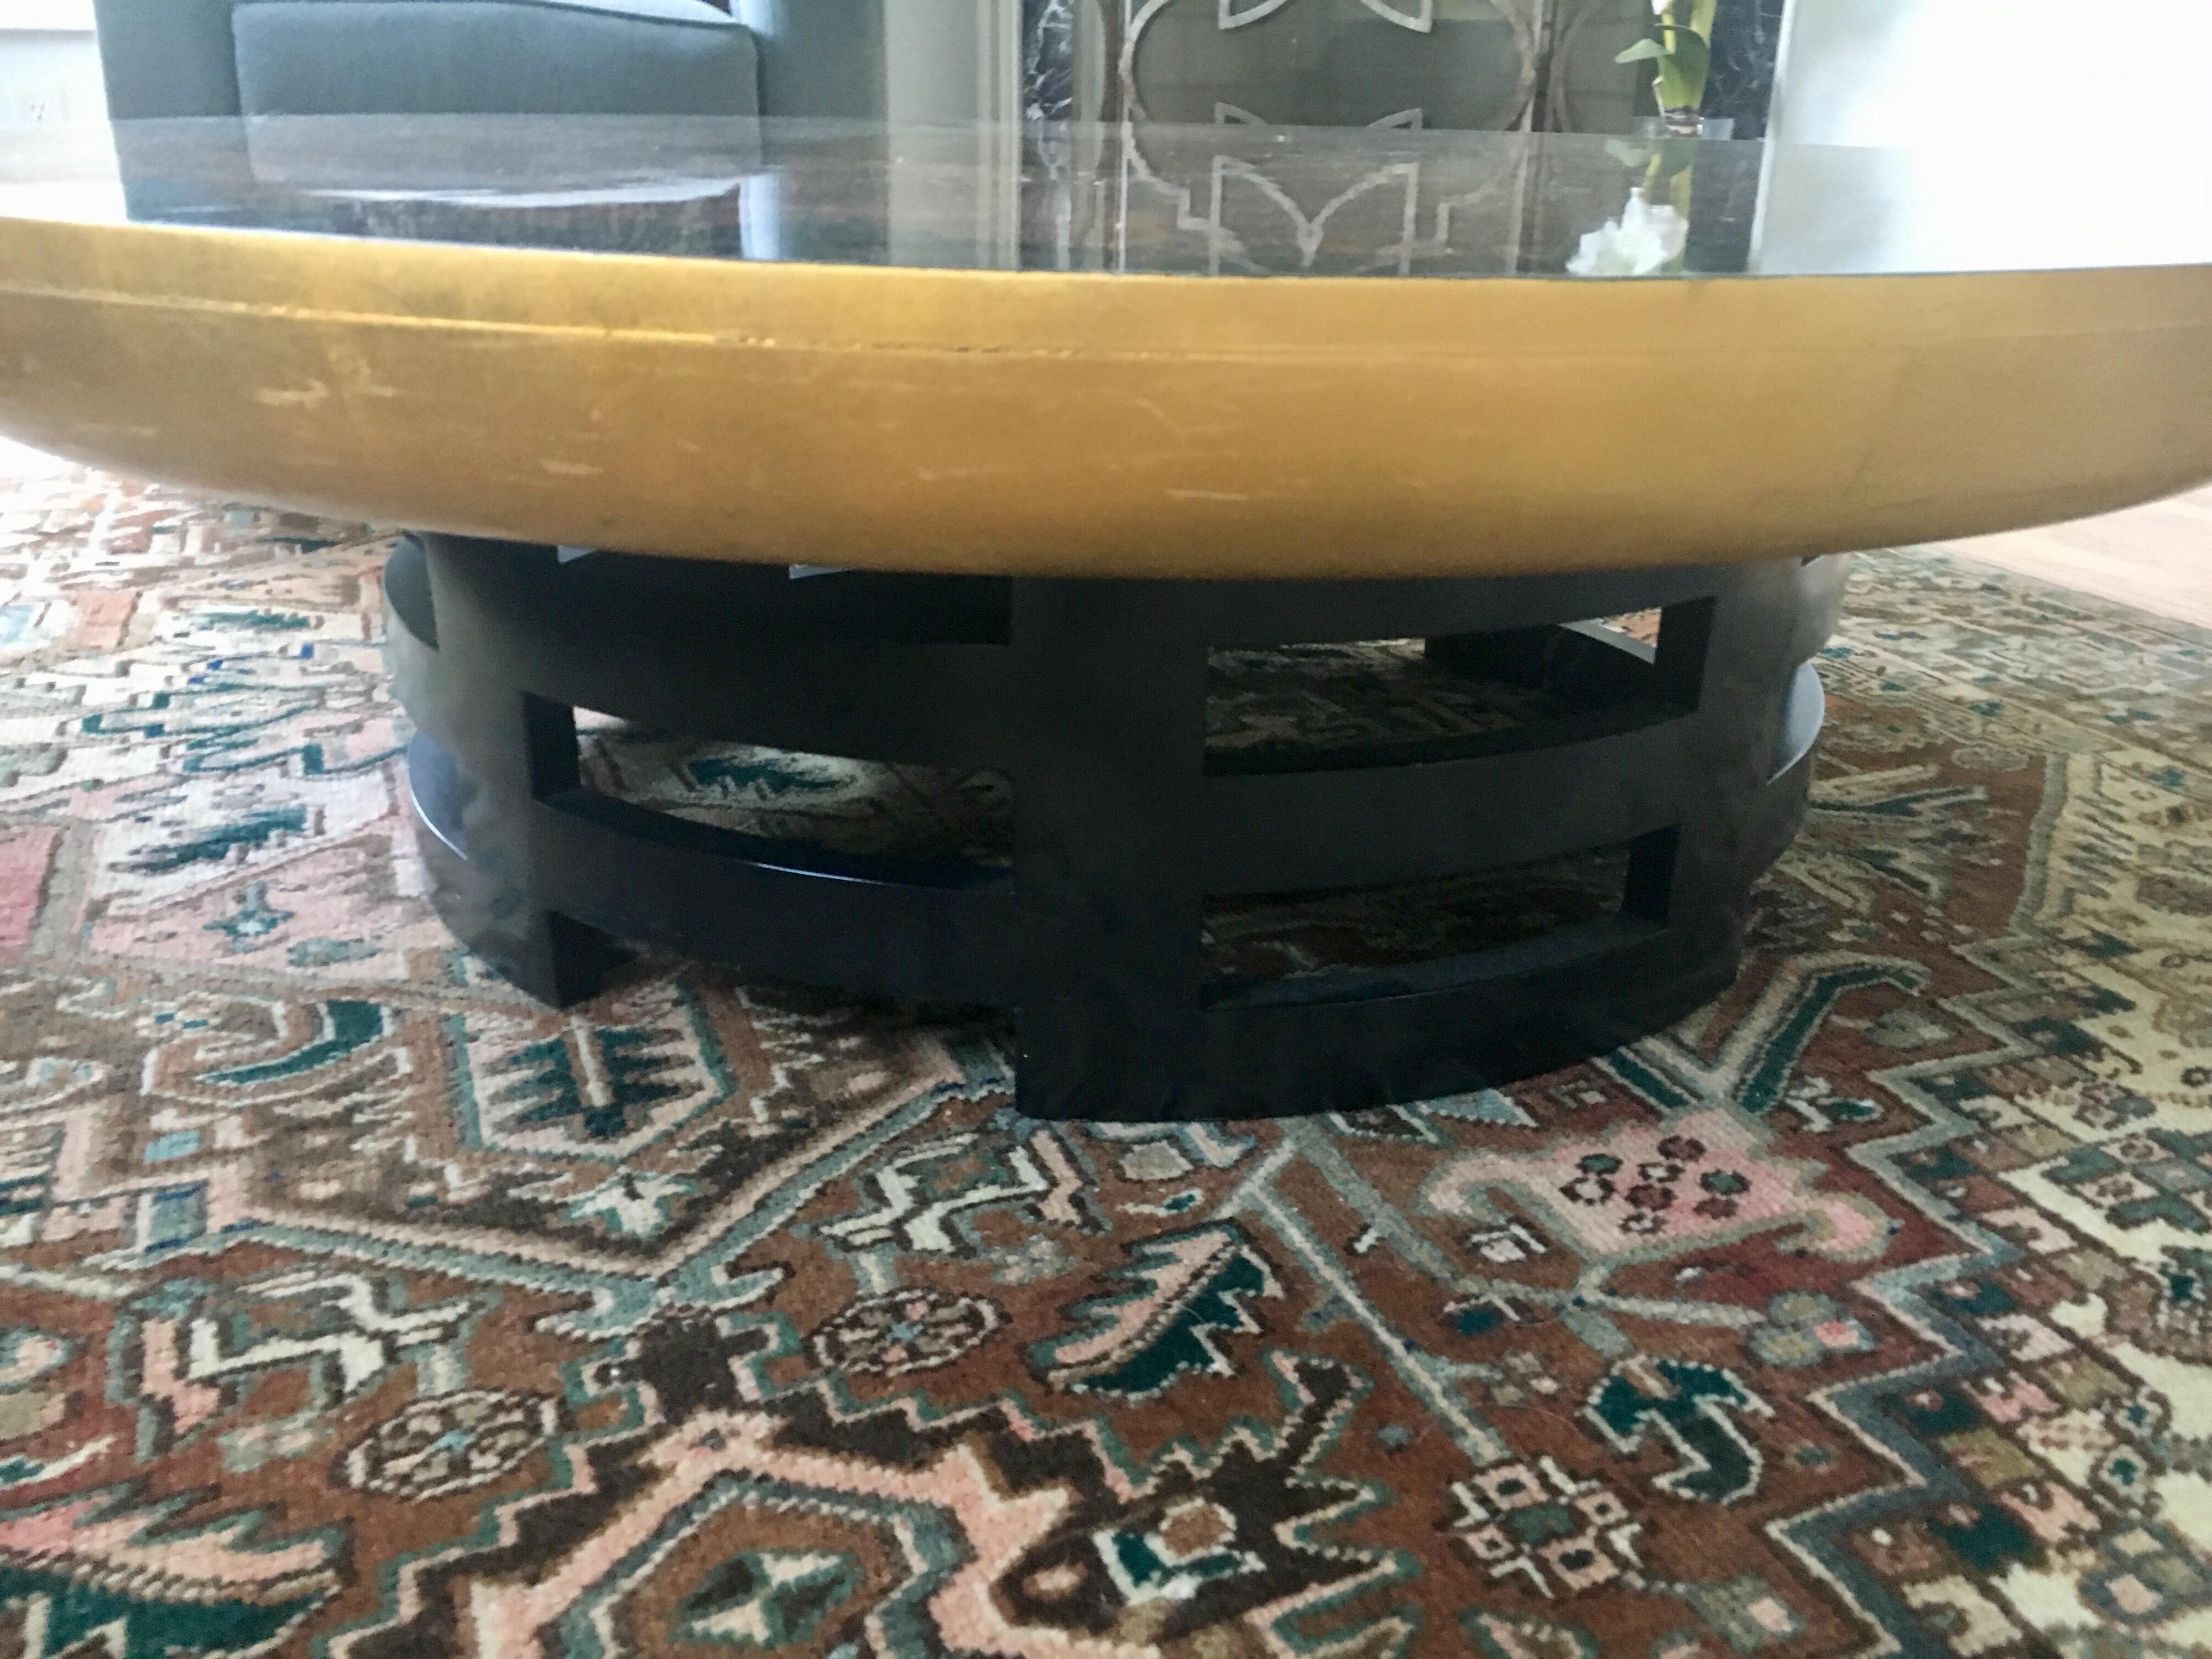 Coveted 1950s Hollywood Regency Classic, the Kittinger lotus table. We are selling it without the custom piece of glass on top.